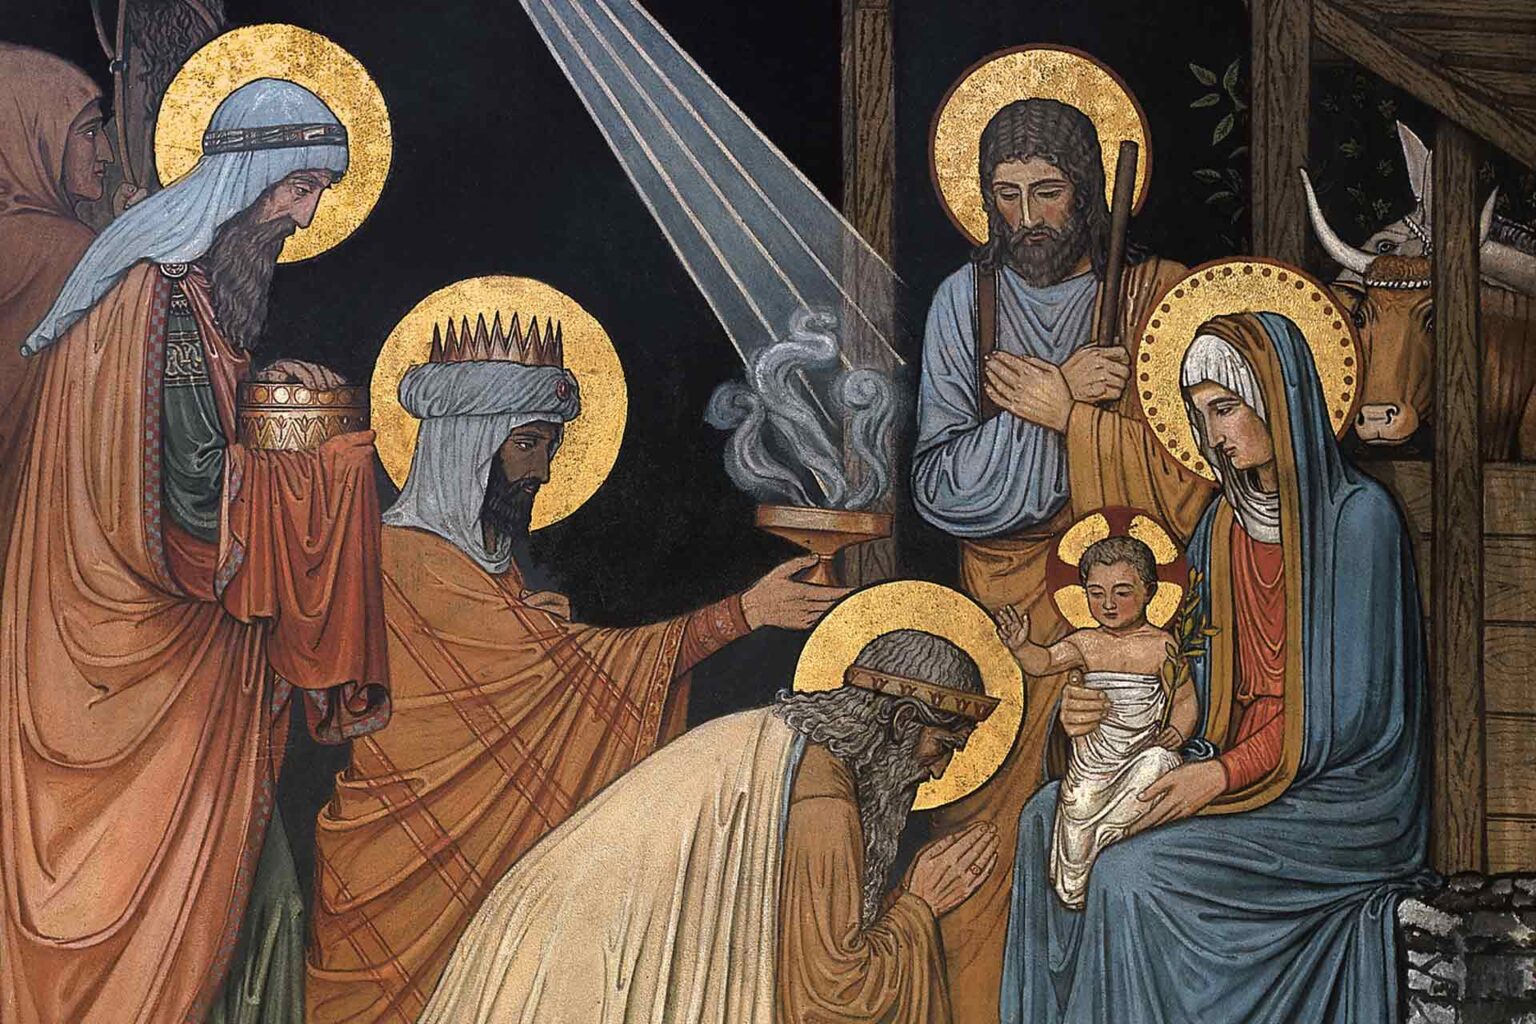 The Epiphany that is Adoration